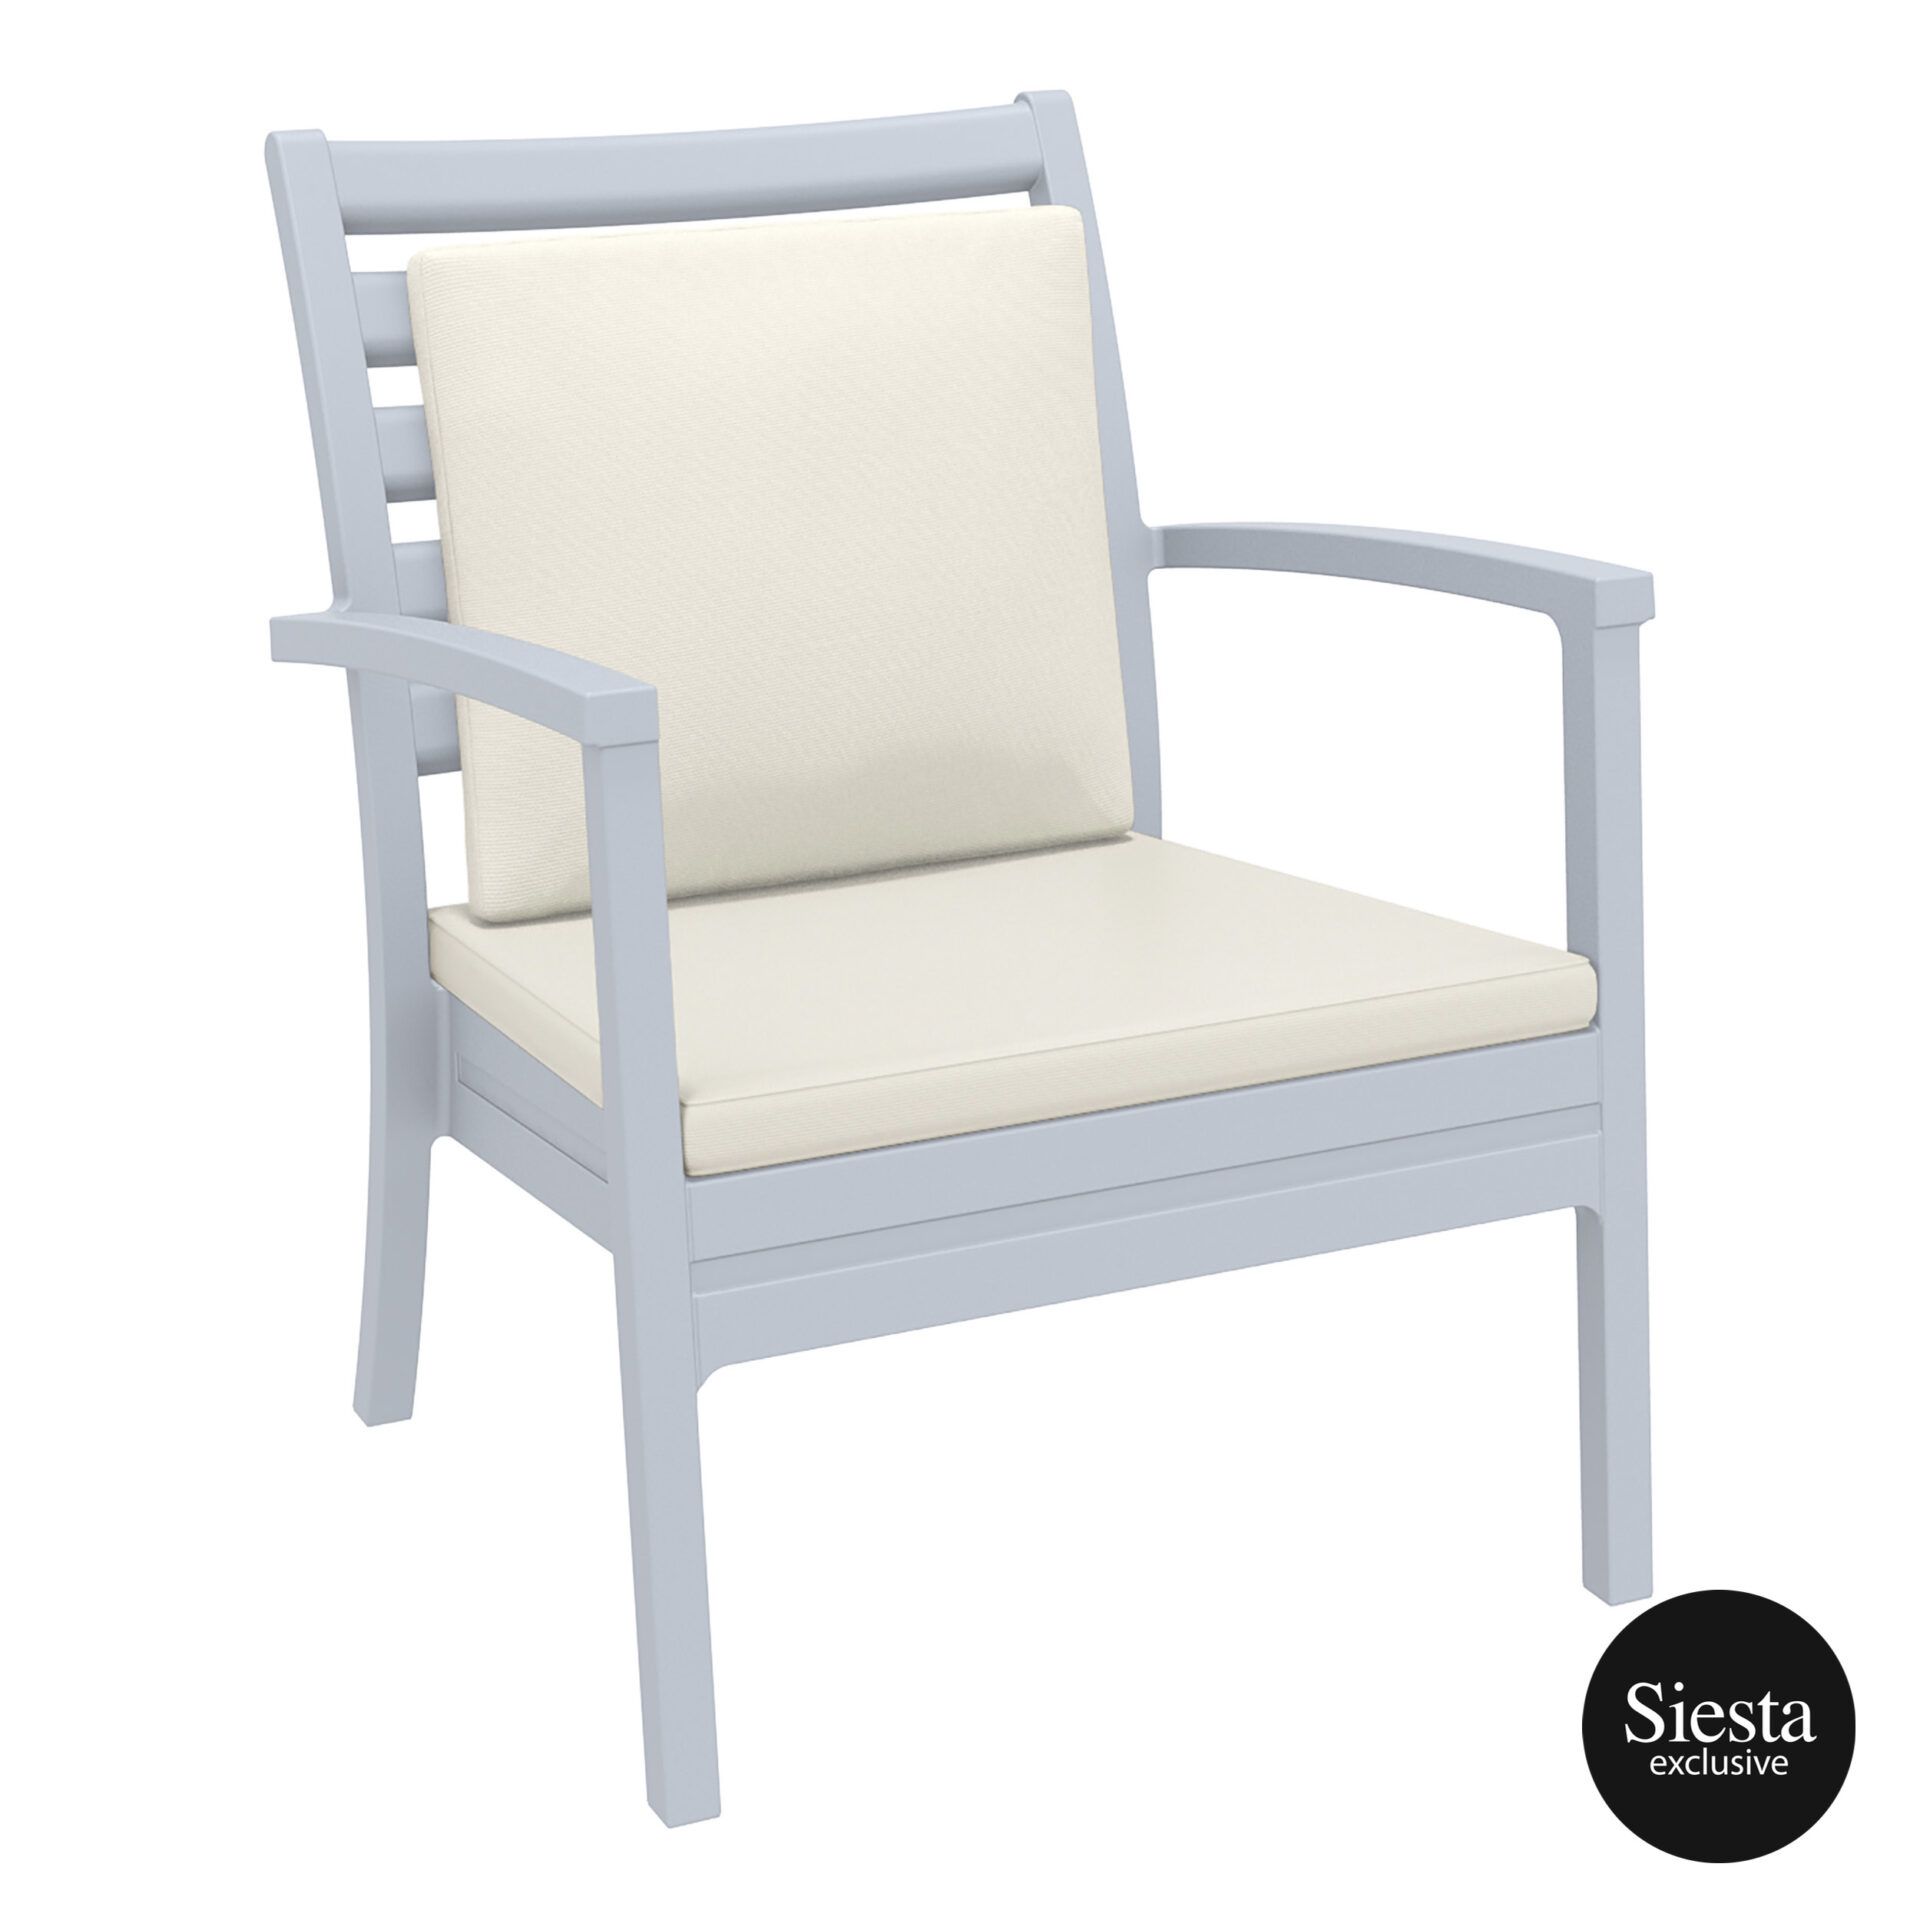 Artemis XL Armchair - Silver Grey with Beige Seat and Back Cushion